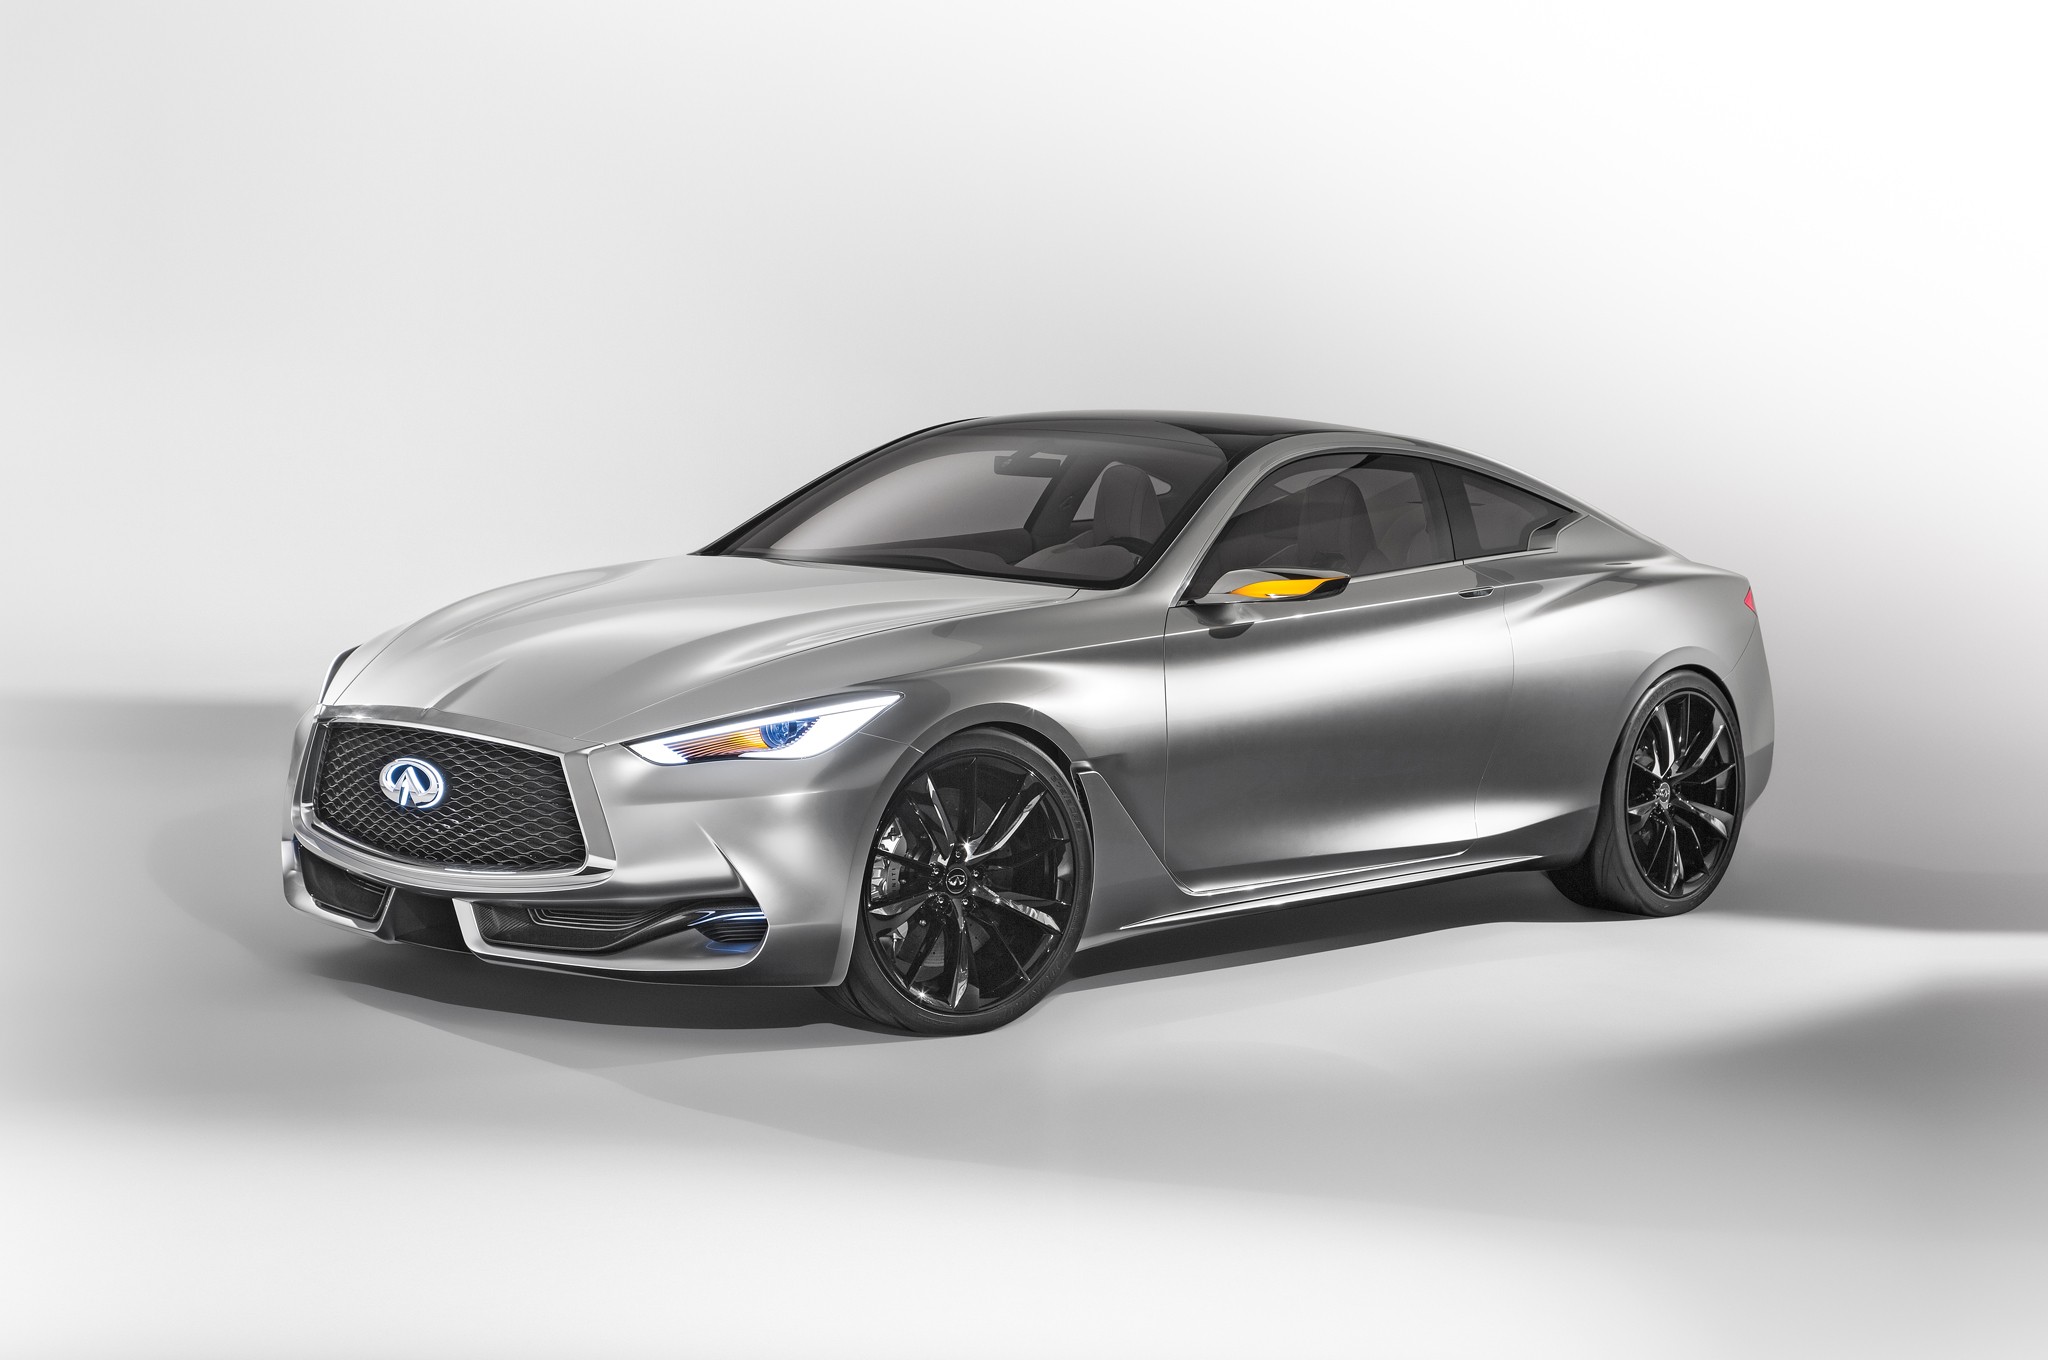 General 2048x1360 Infiniti 2015 Infiniti Q60 Coupe concept cars car vehicle white background silver cars Japanese cars